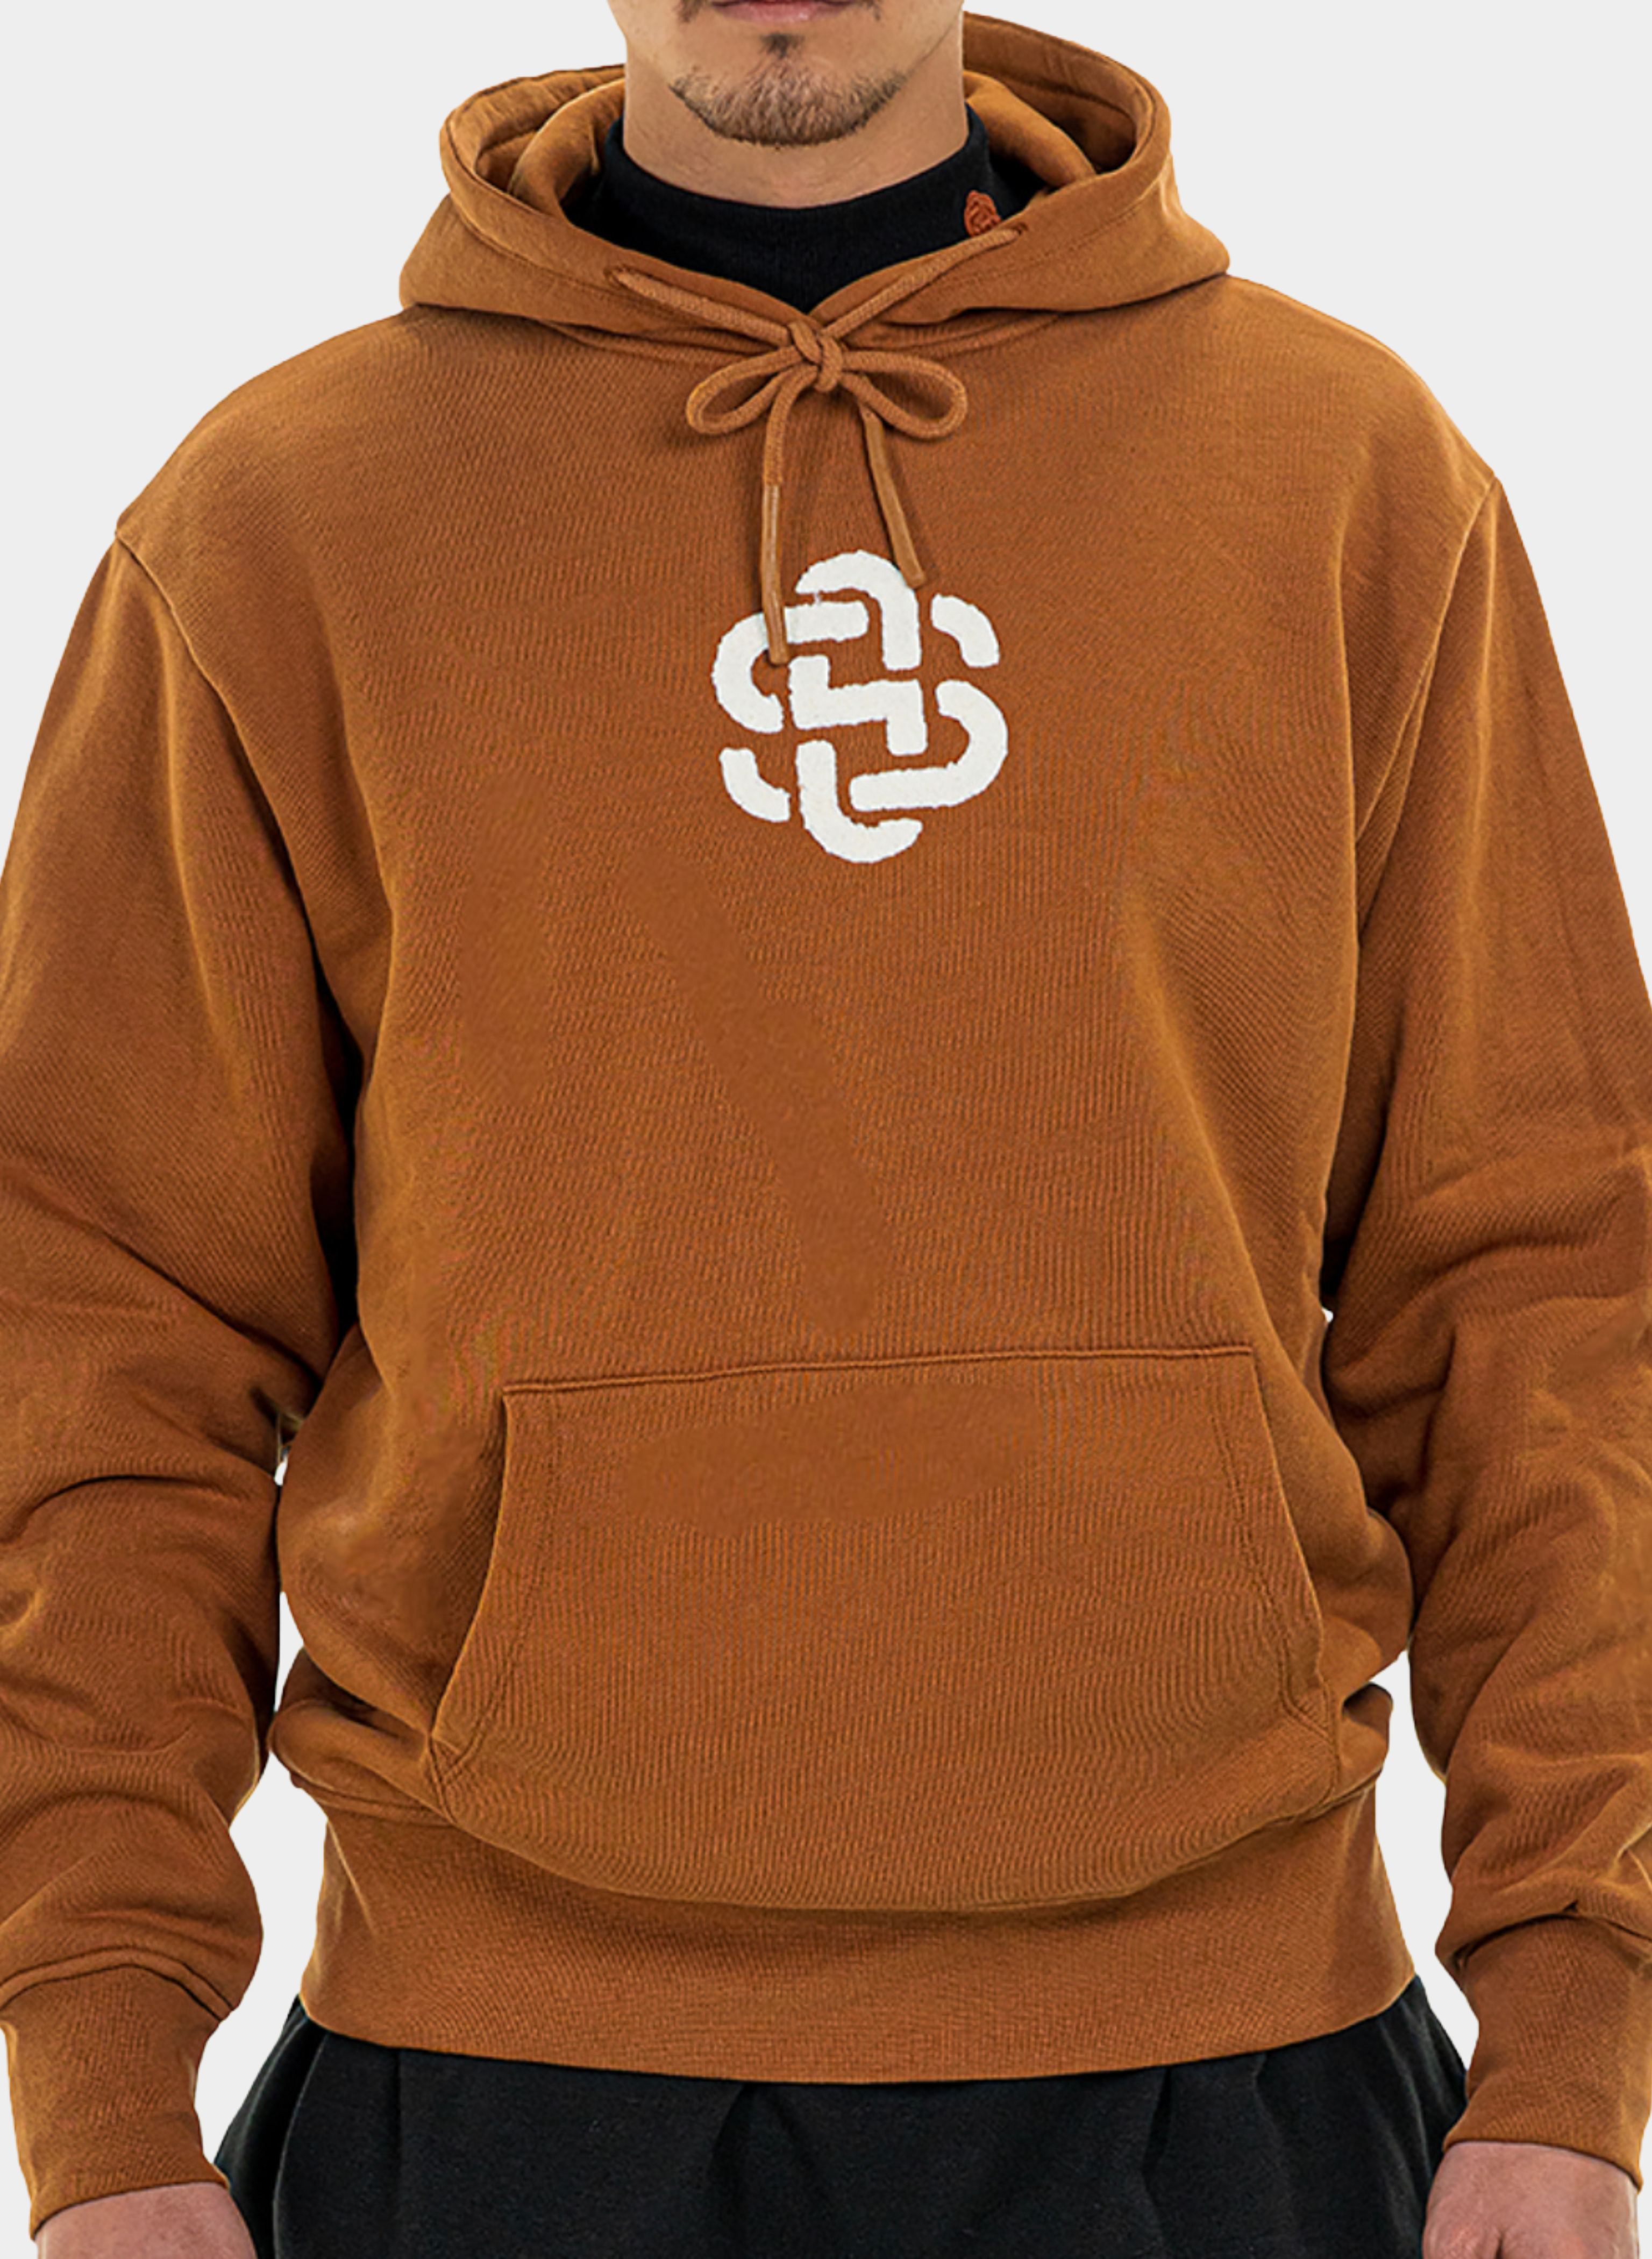 Weighted Cotton Emblem Hoodie (Copper)